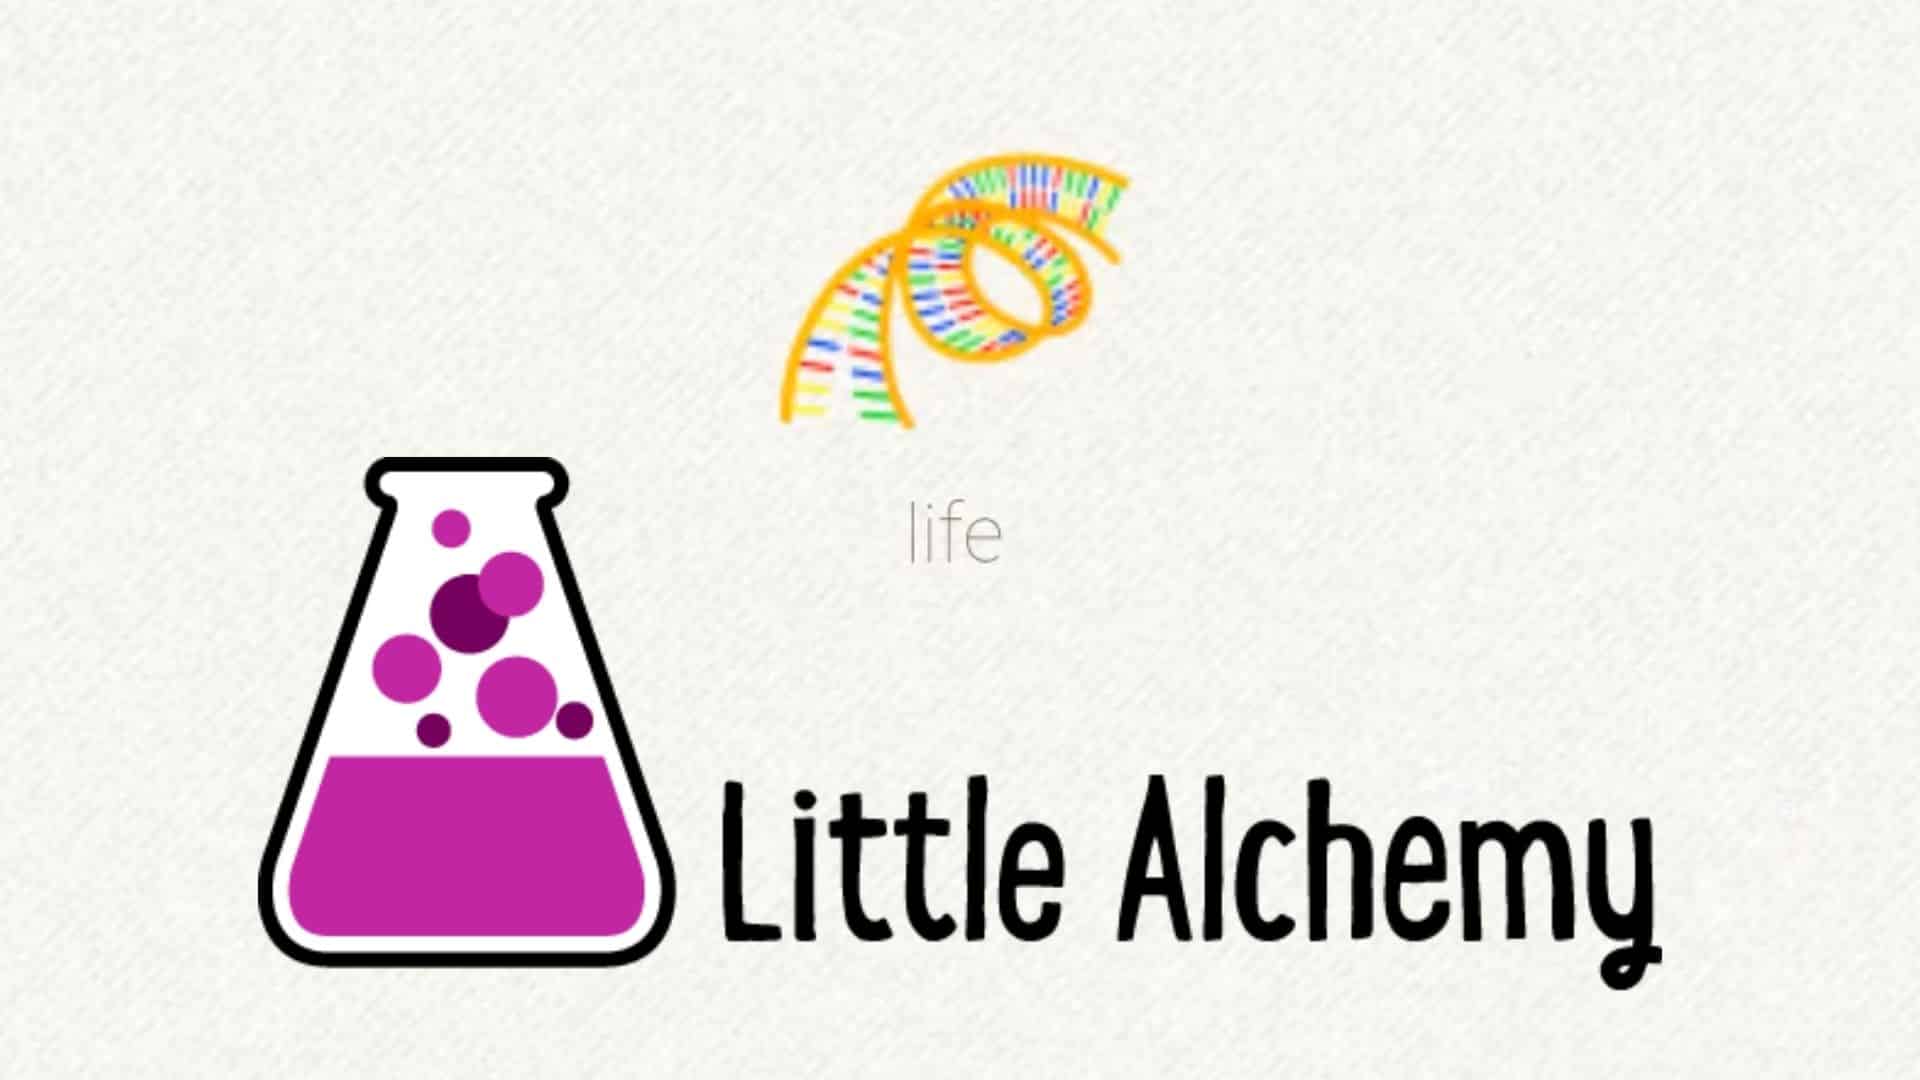 How to make chicken in Little Alchemy – Little Alchemy Official Hints!